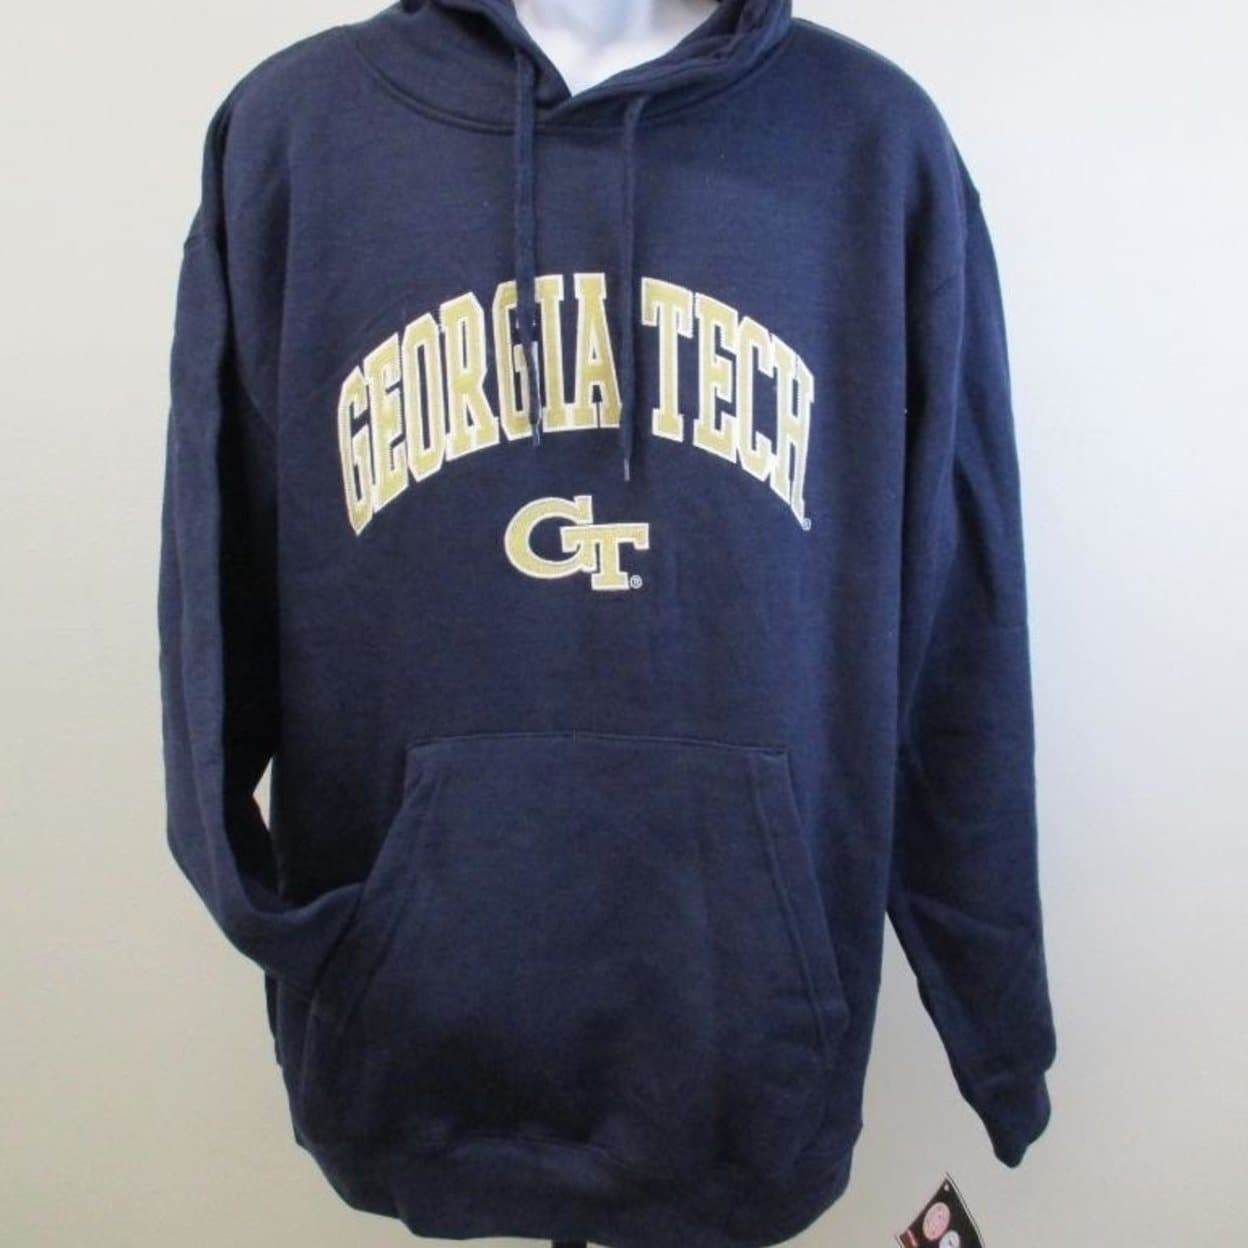 College-NCAA New Georgia Tech Yellow Jackets Youth Sizes S-M-L-XL Navy ...